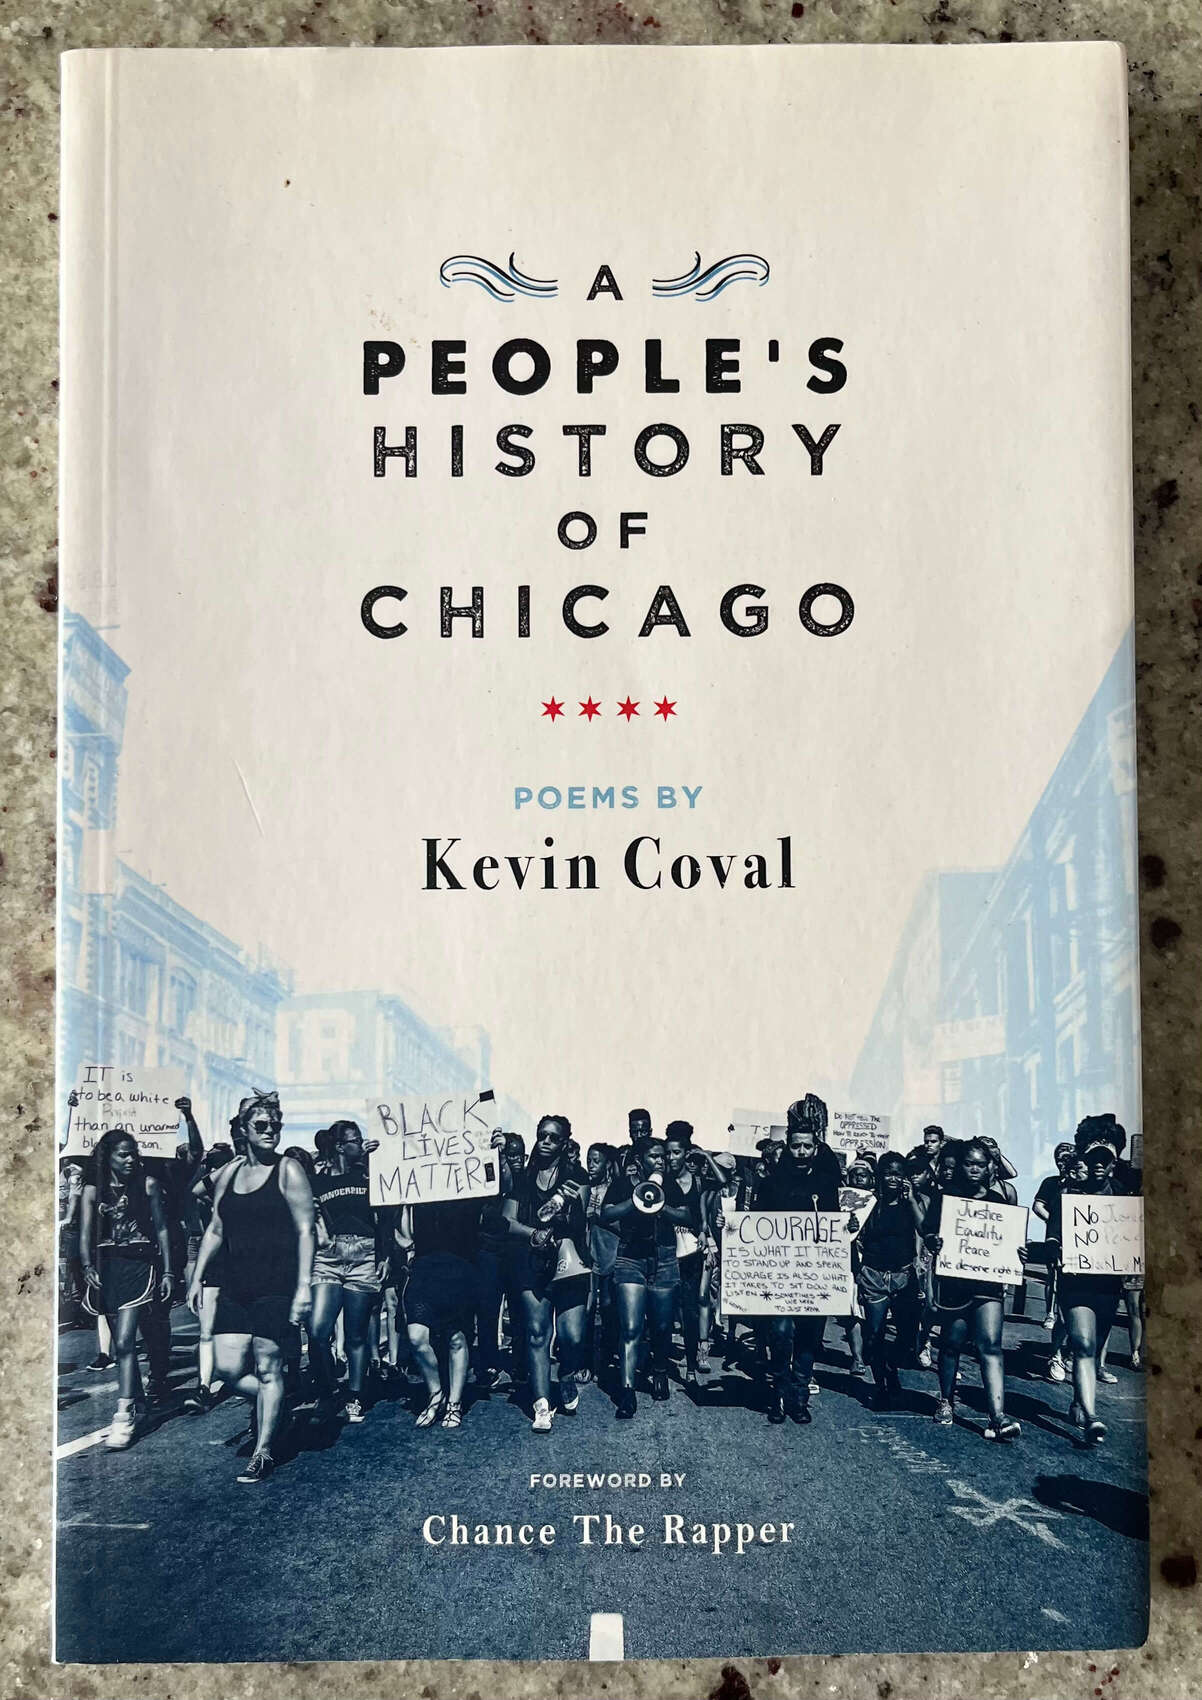 “A People’s History of Chicago” Poems by Kevin Coval. Foreward by Chance the Rapper.